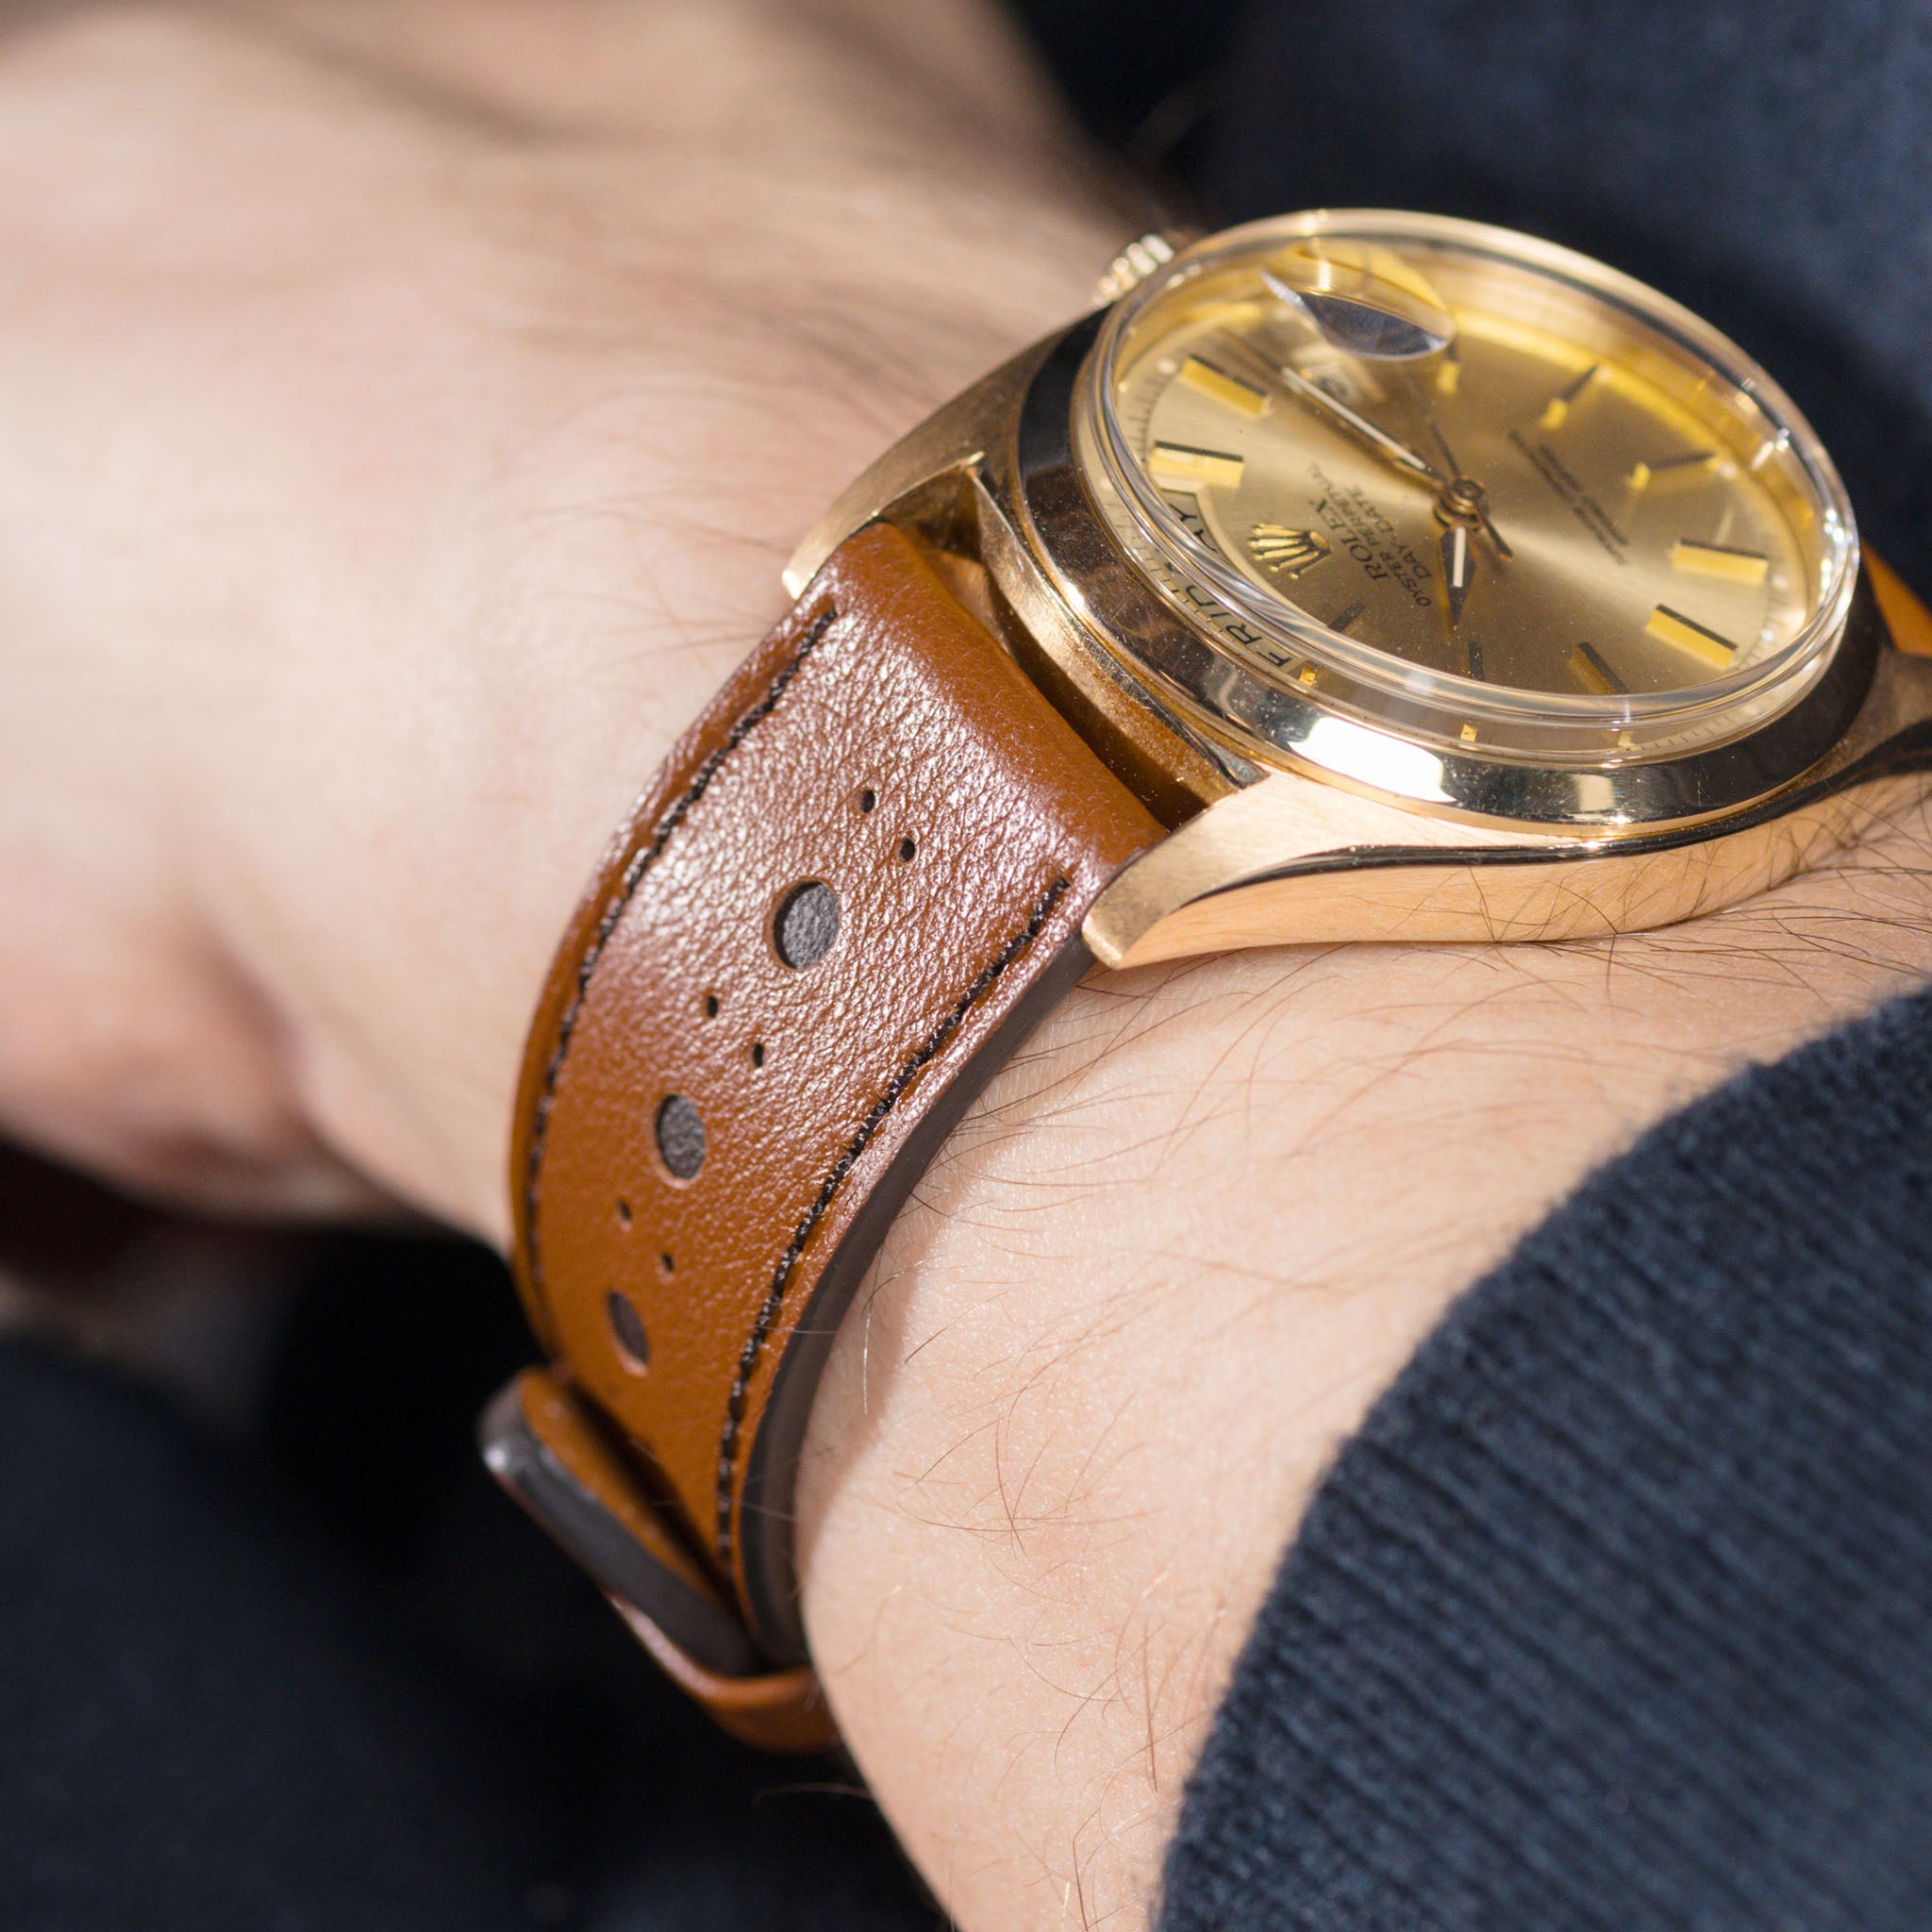 The Night Out Brown Brogue Leather Watch Strap – Jubilee Edition